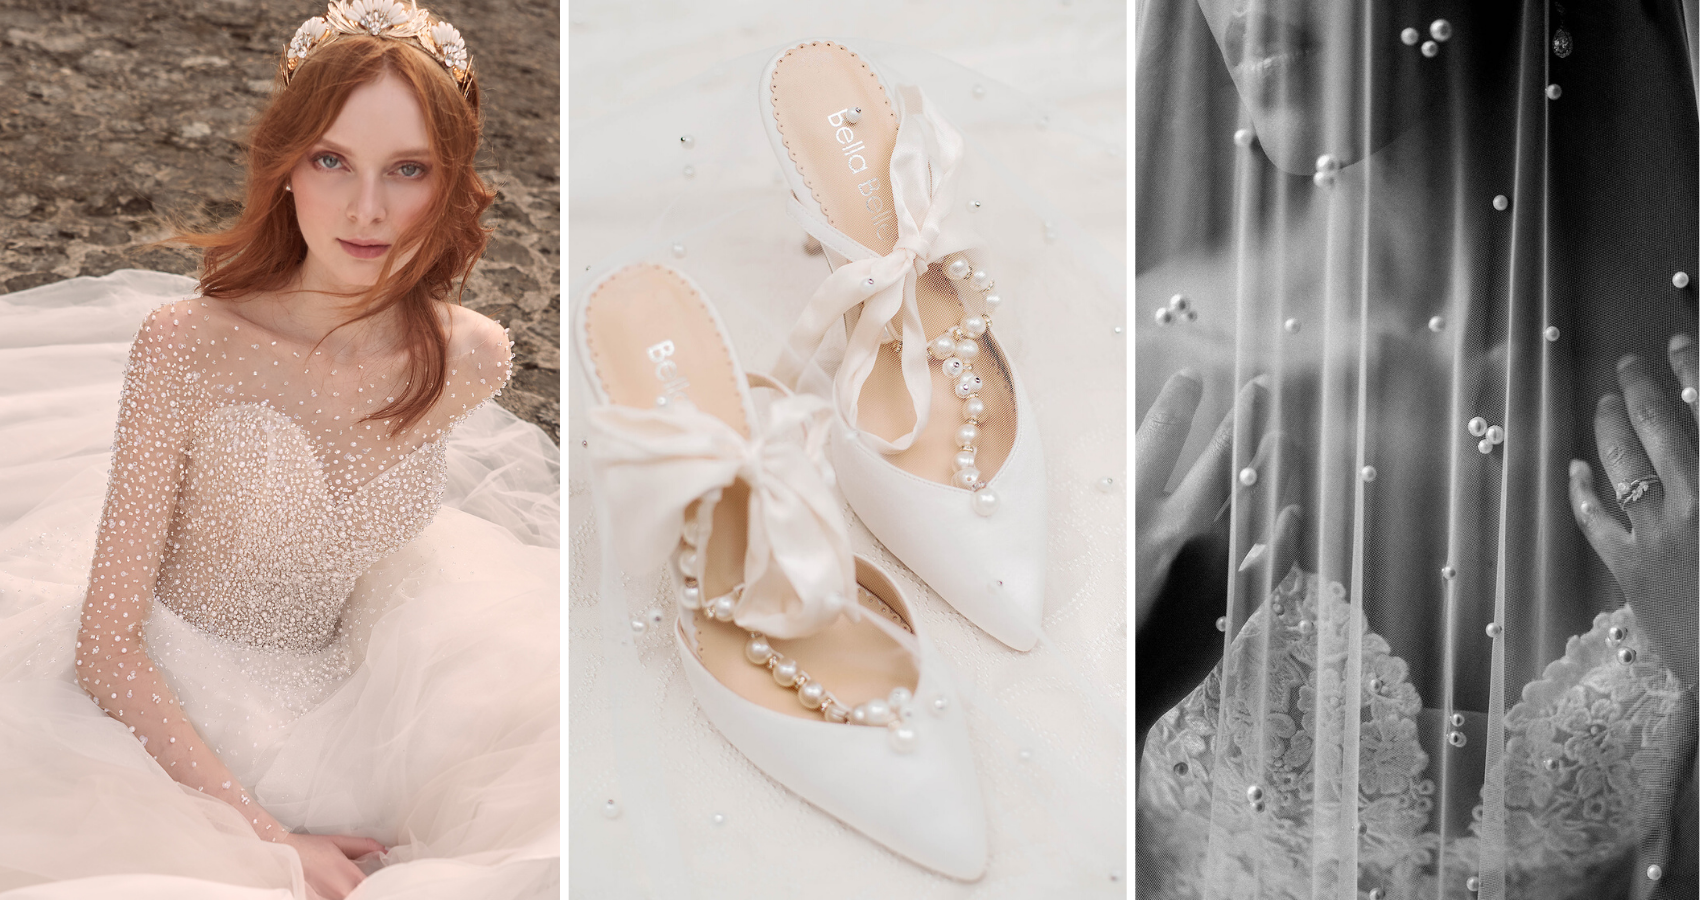 Wedding Pearls Blog Header With Bride Wearing Rosette By Maggie Sottero, Pearl Wedding Heels, And A Bride Wearing A Pearl Veil Called Pierce By Sottero And Midgley